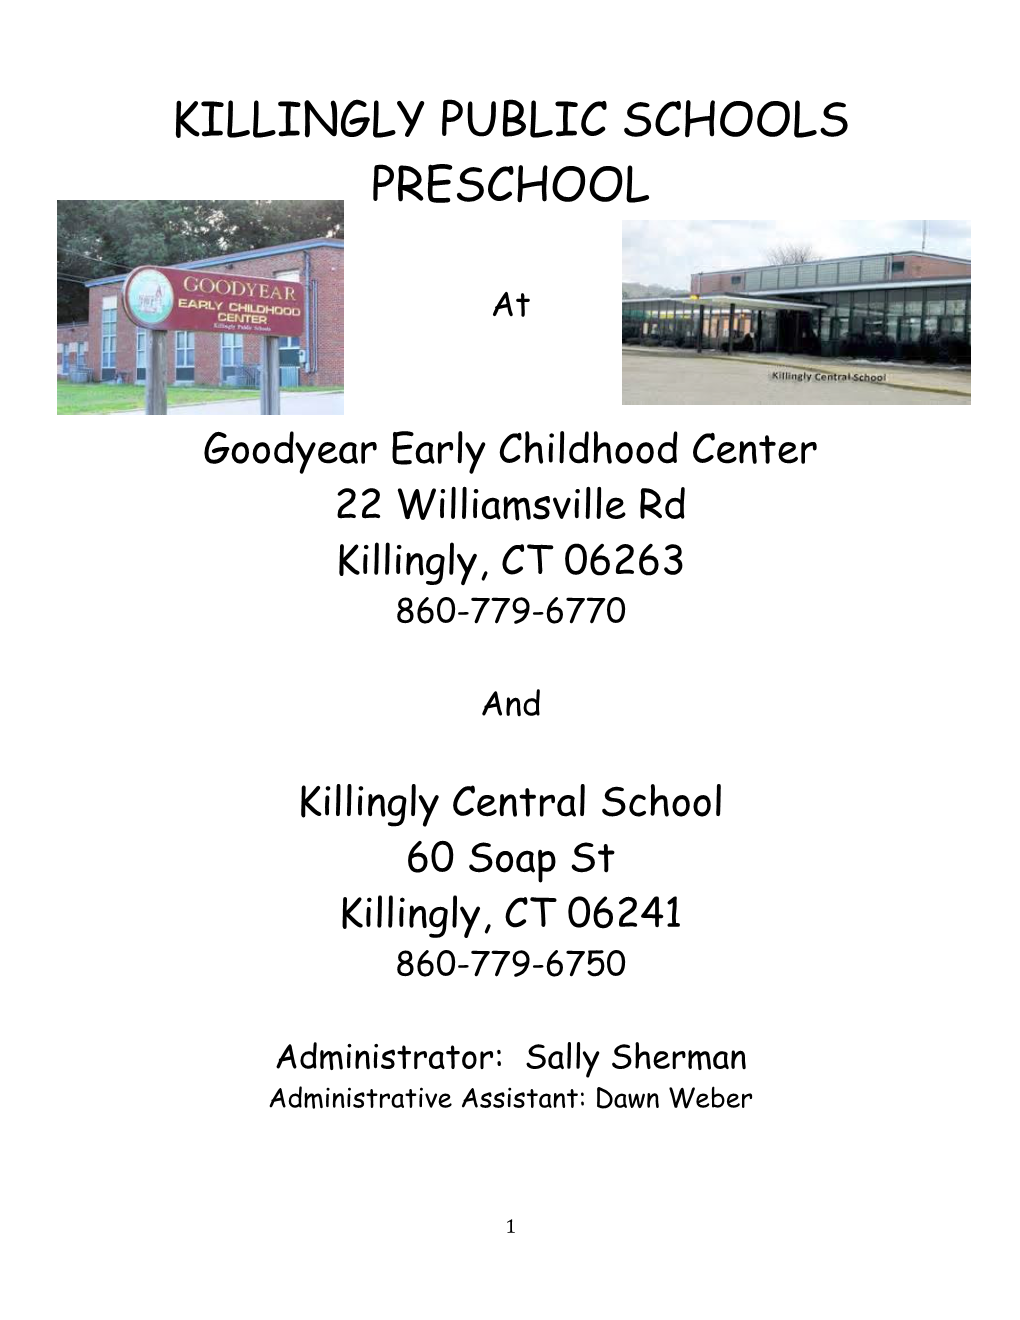 Goodyear Early Childhood Center